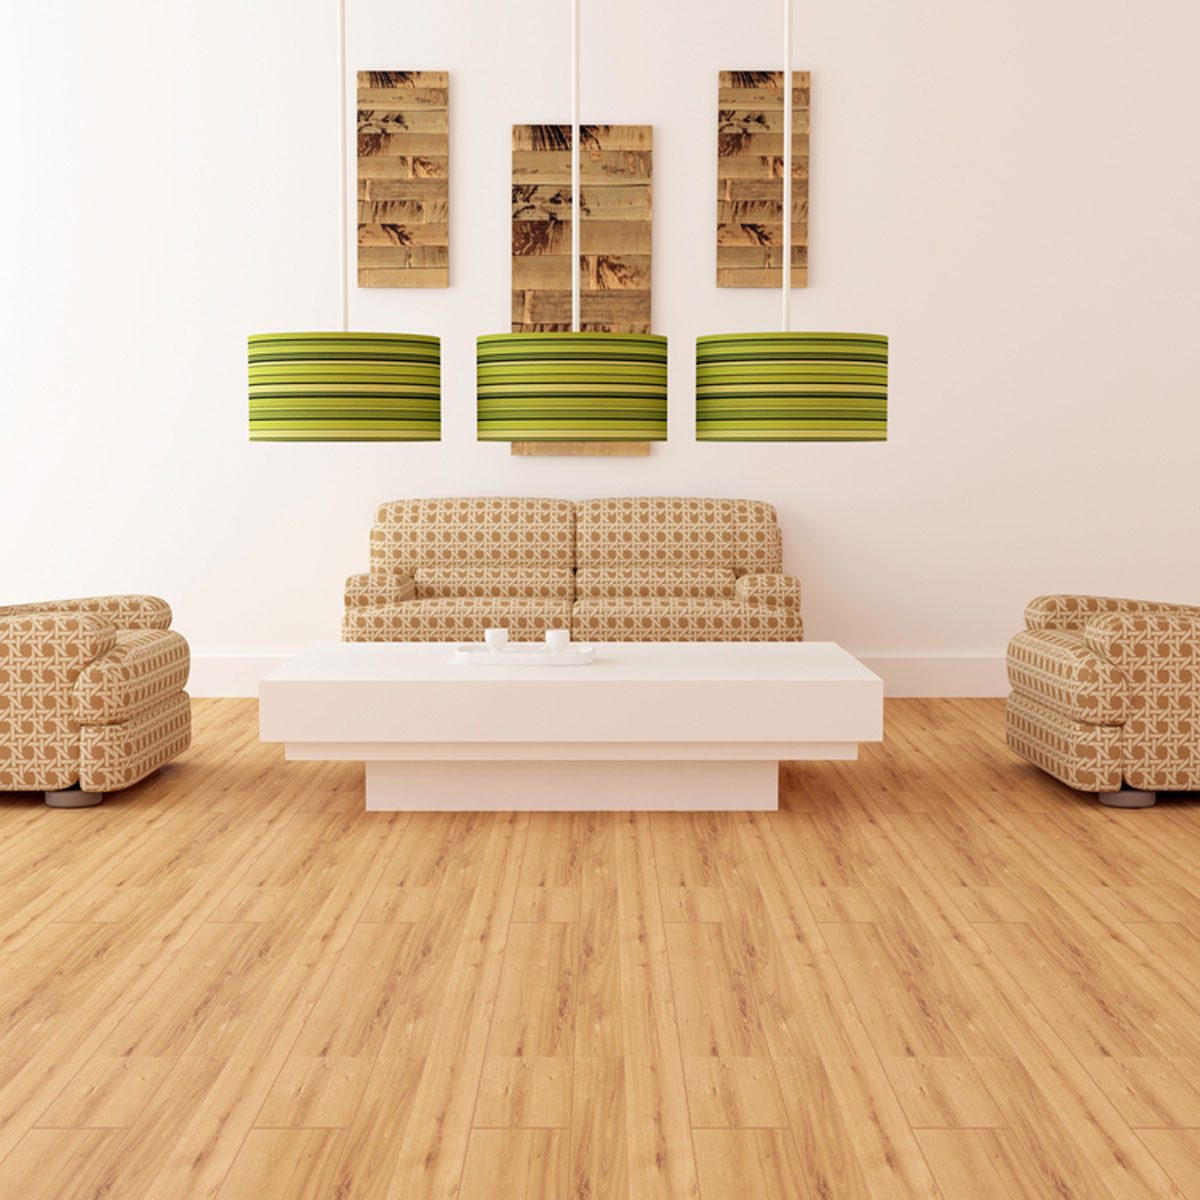 Local Floor Compare – New Floors Have Never Been This Easy!